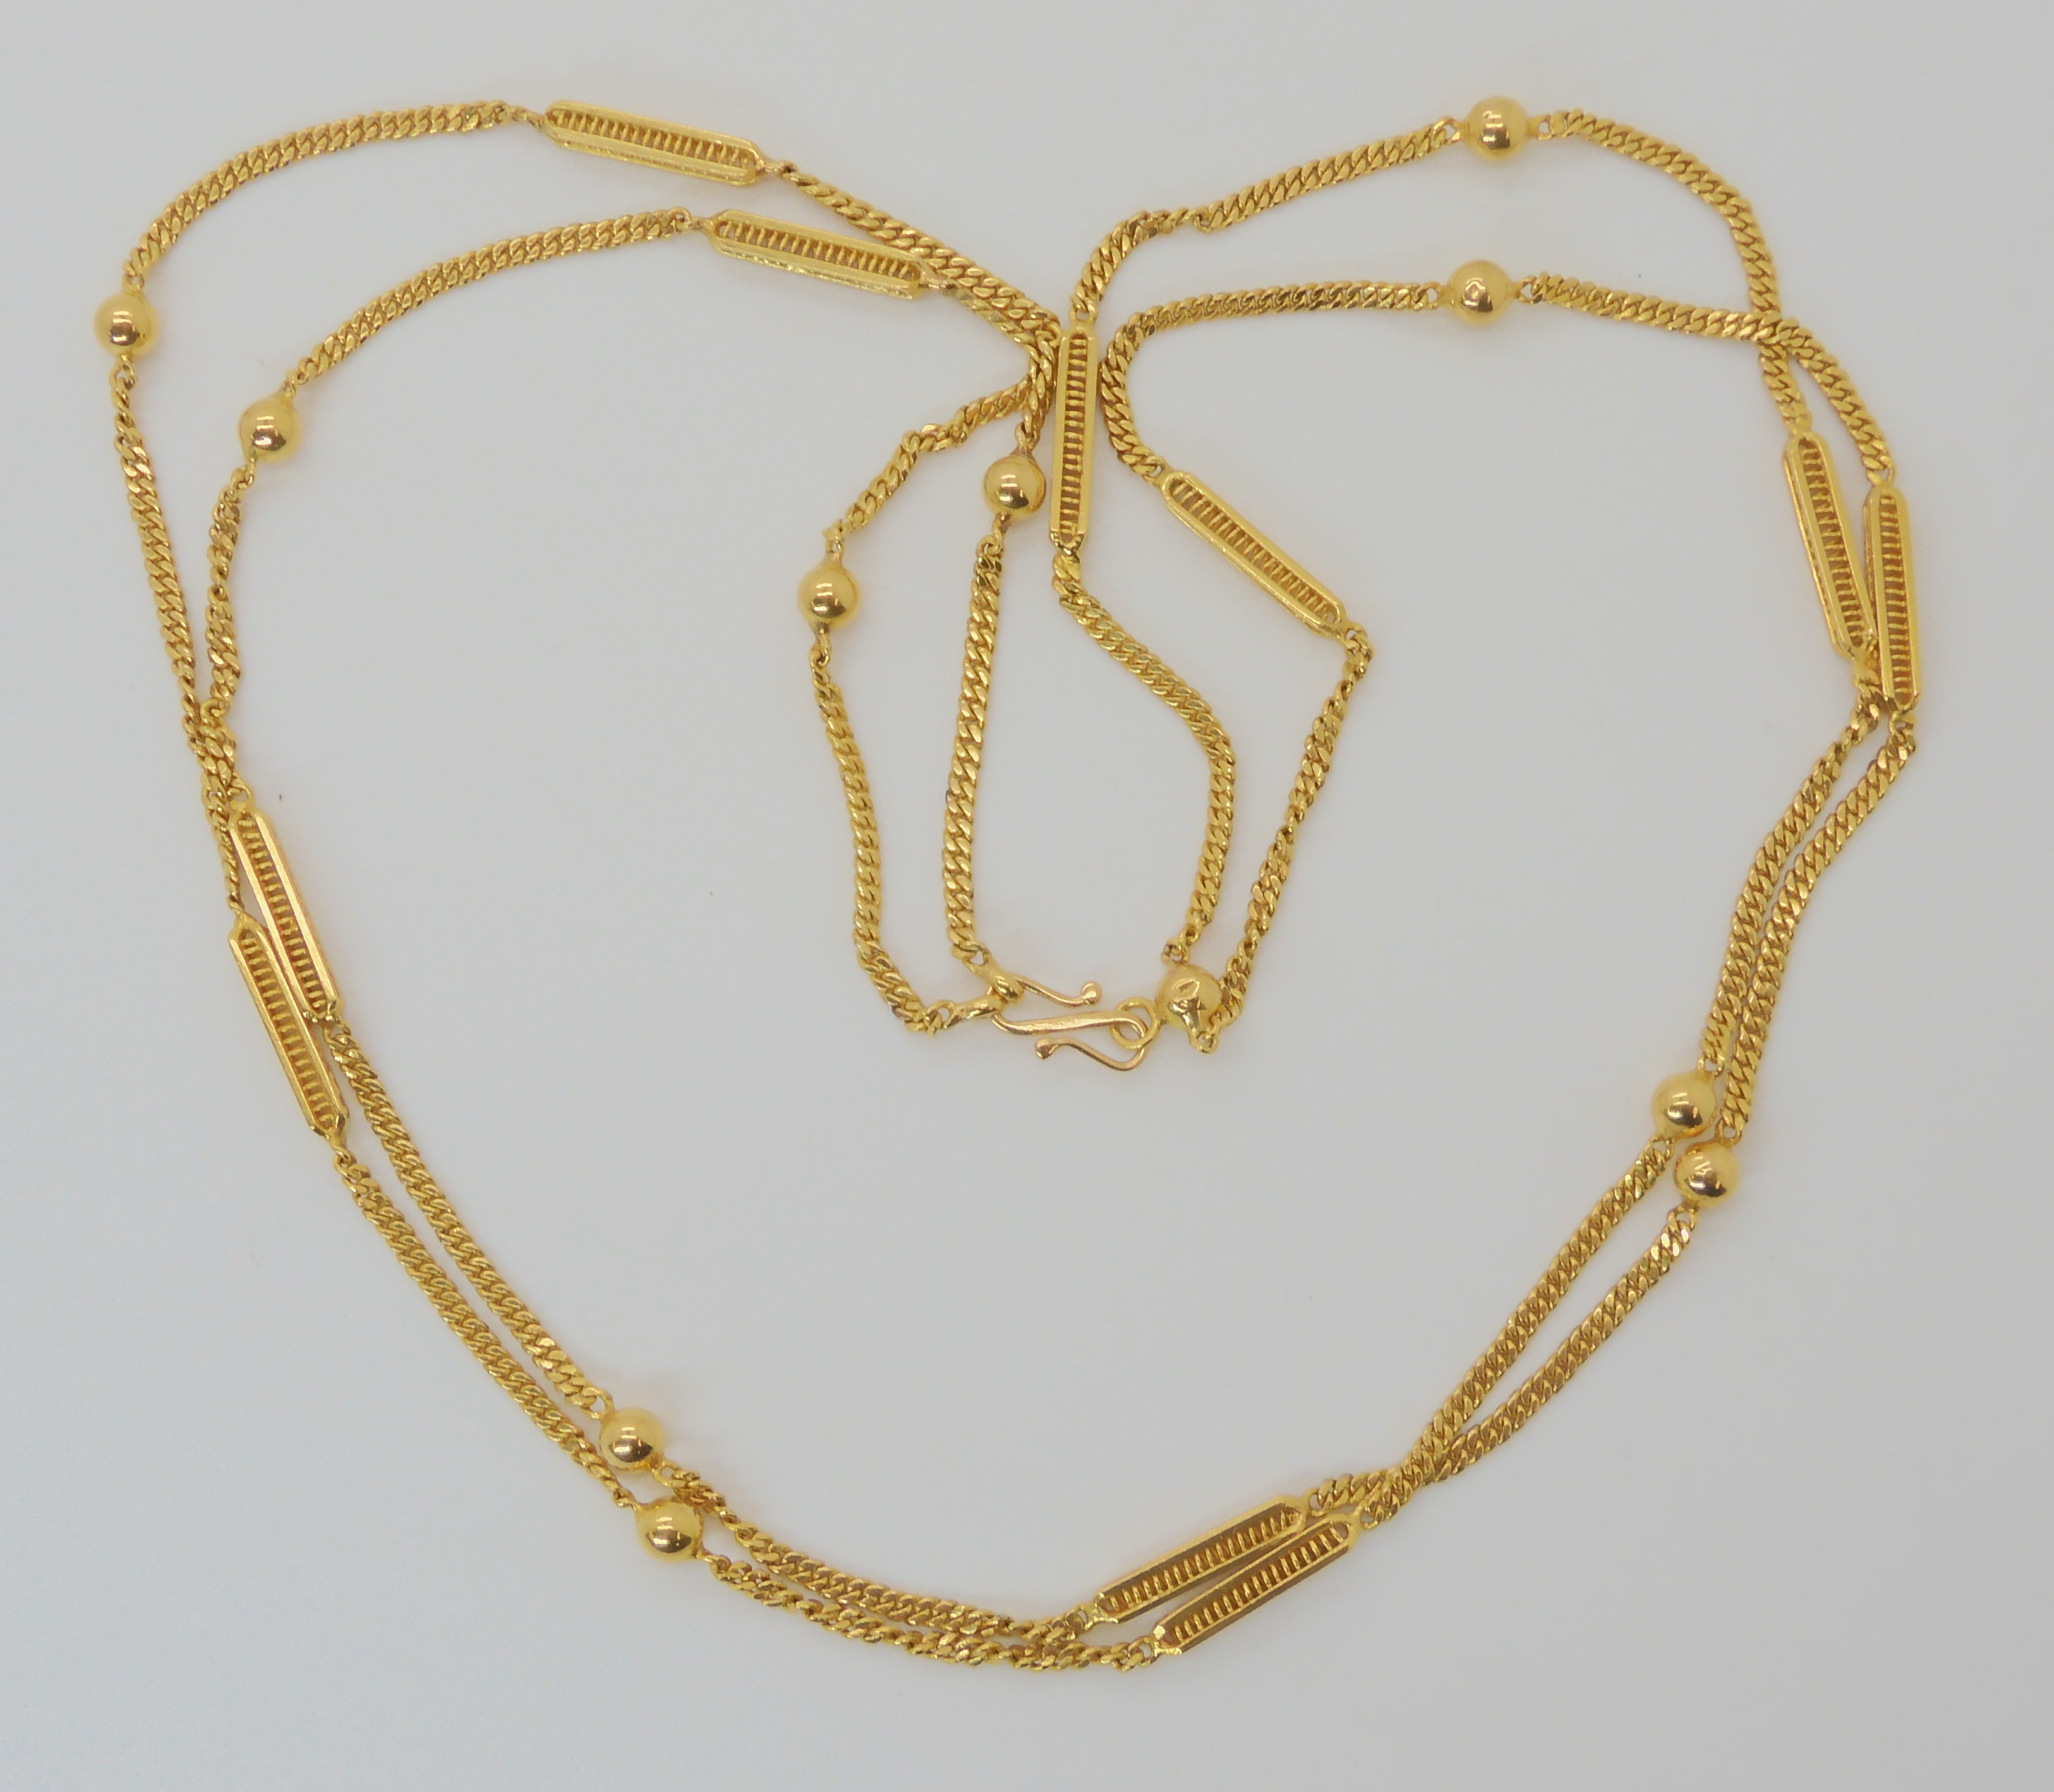 A BRIGHT YELLOW METAL DOUBLE LENGTH FANCY CHAIN with ball and fancy baton links, can be worn in - Image 2 of 2